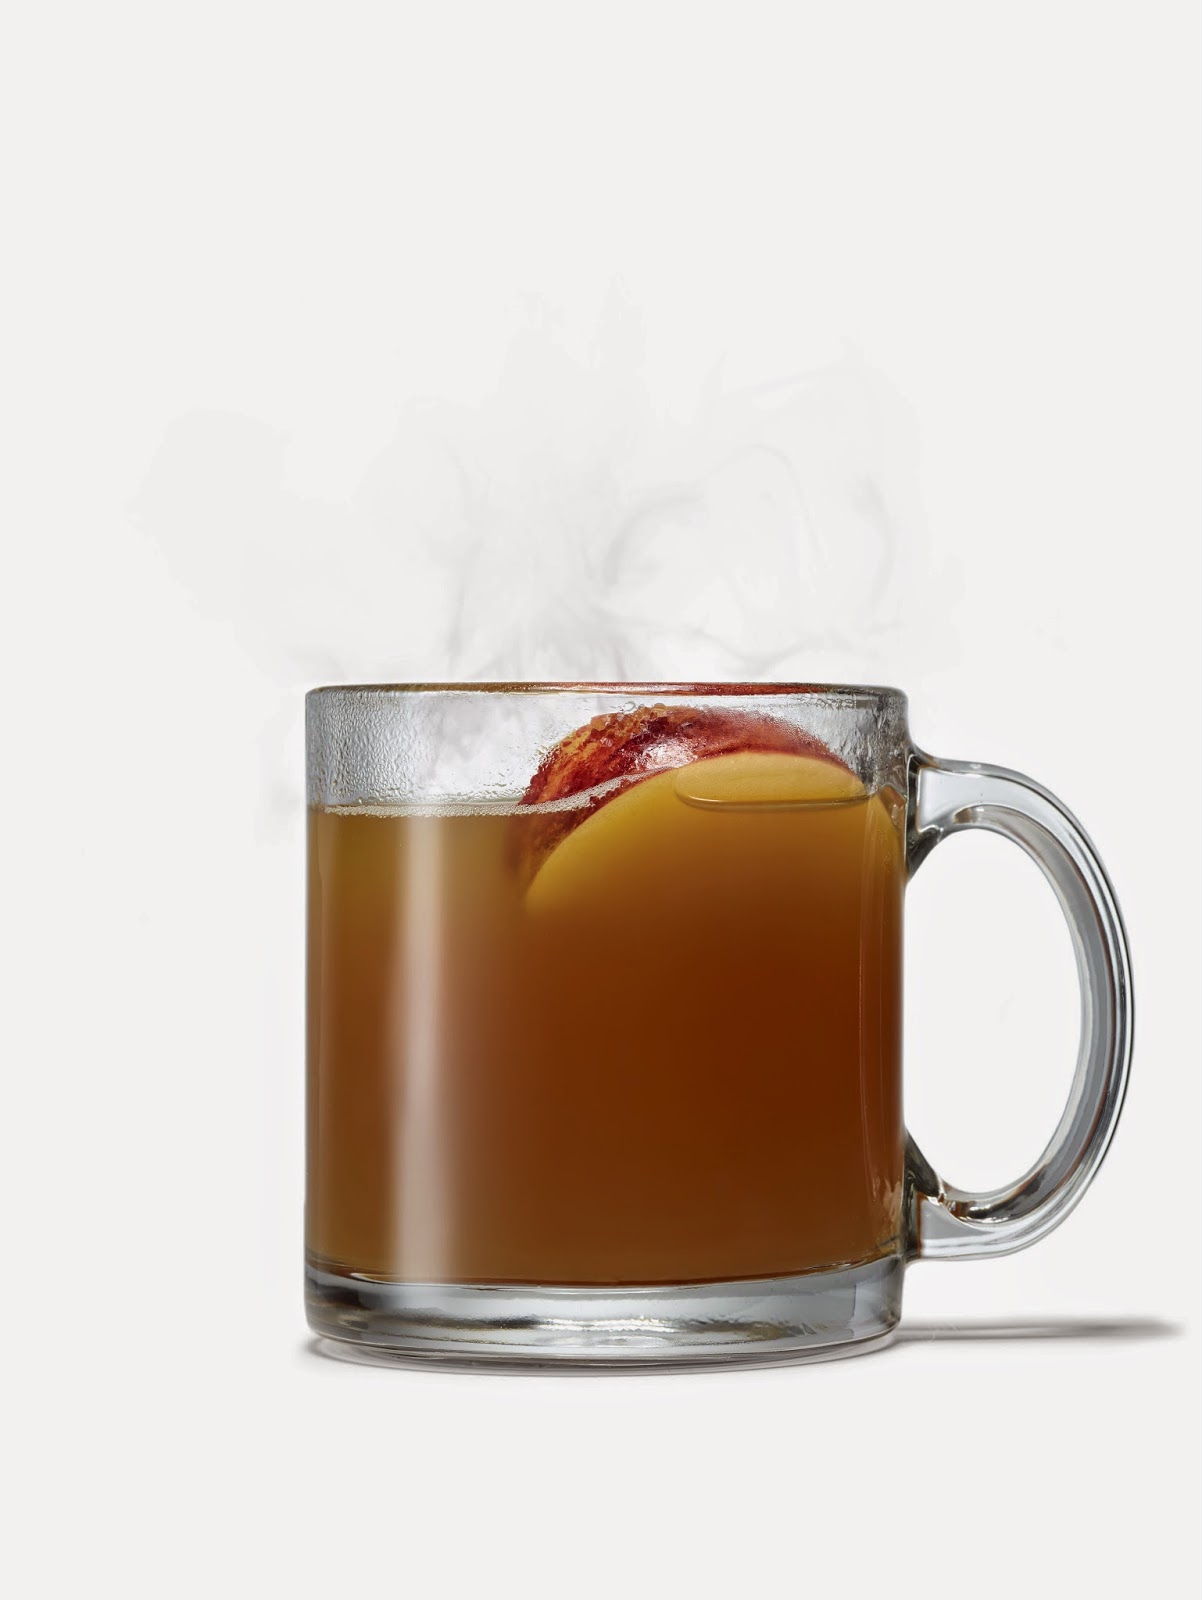 Crown Royal Regal Apple Warm Cocktail for Valentine's Day